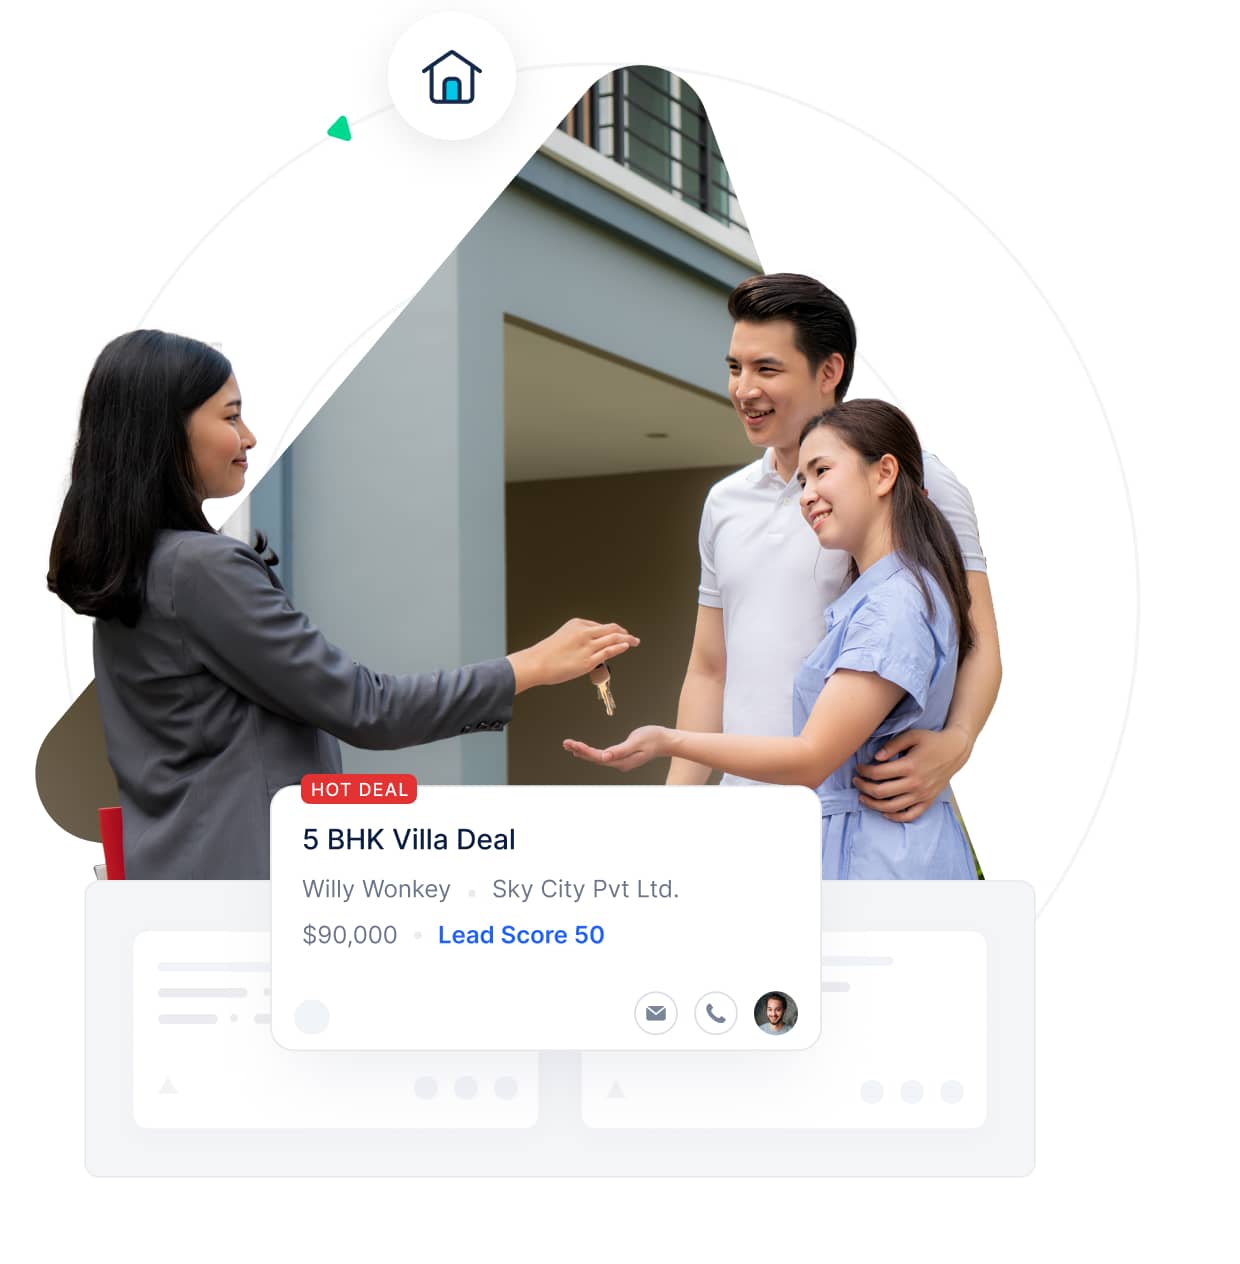 Sell more properties with the best CRM for realtors